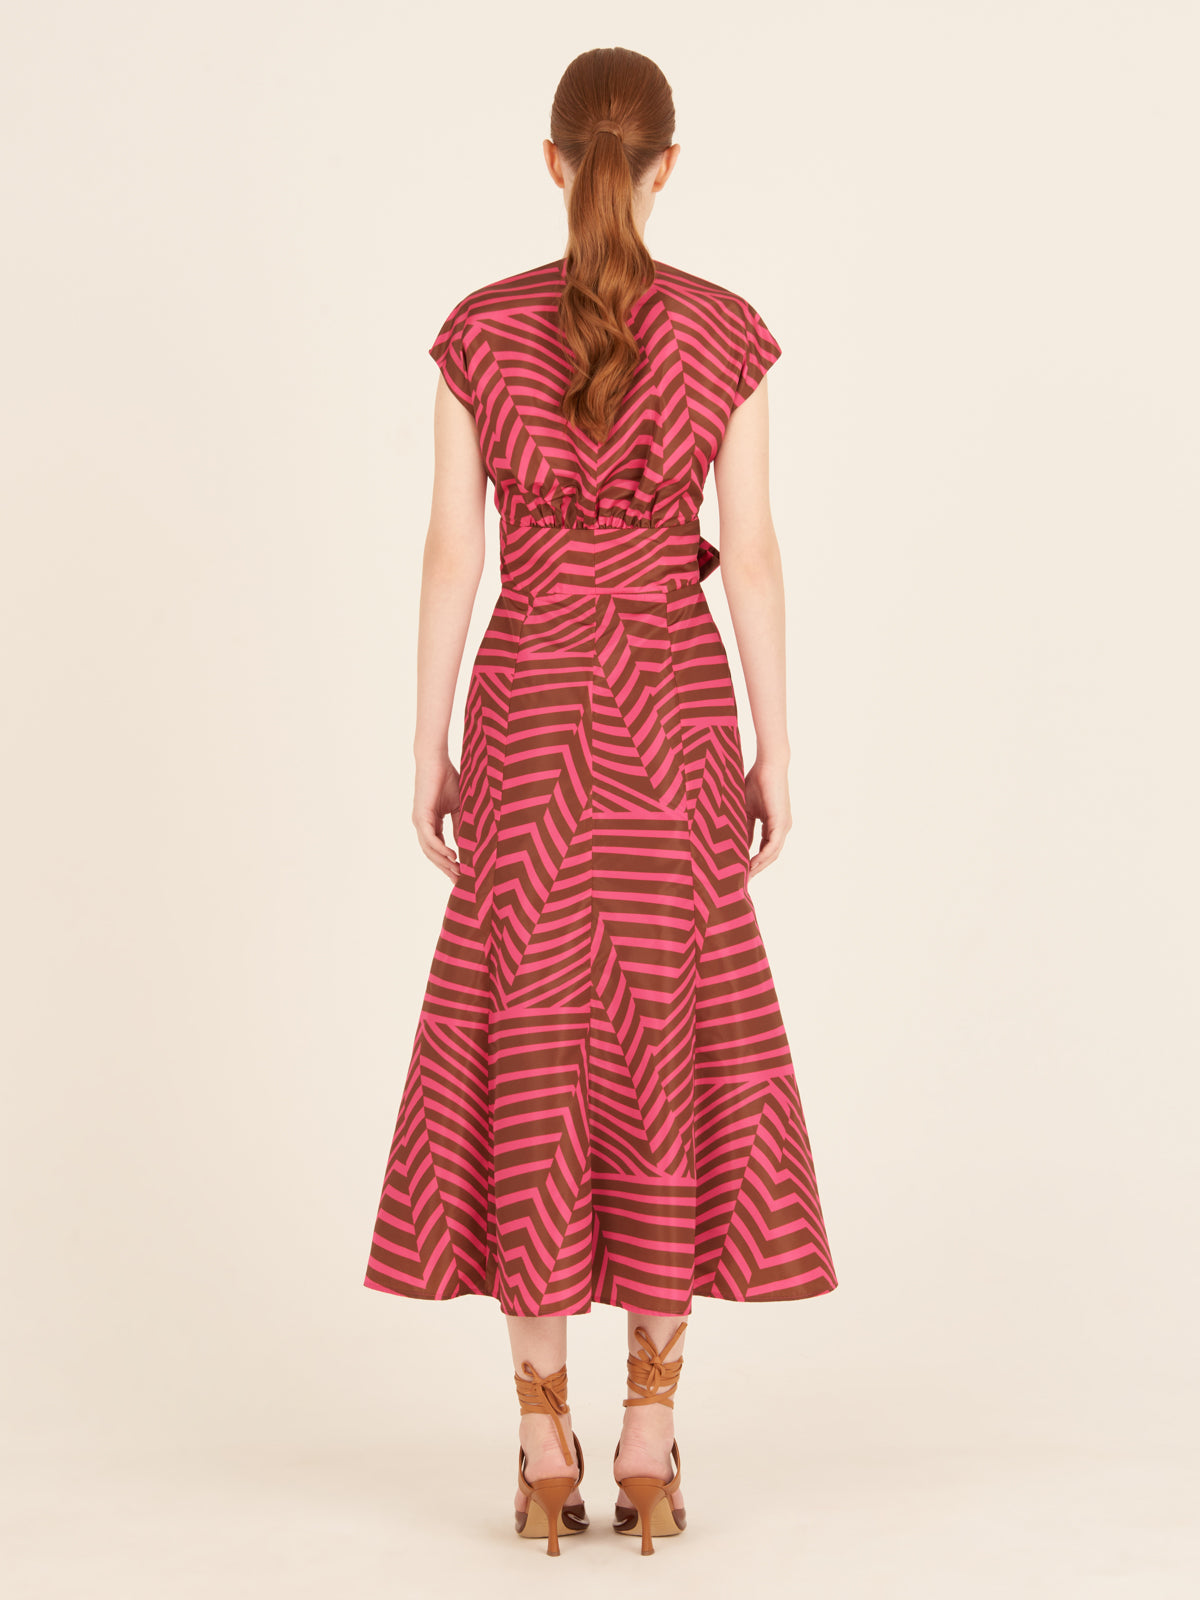 A feminine Toledo Dress Fuchsia Cacao with a bow, perfect for any occasion.